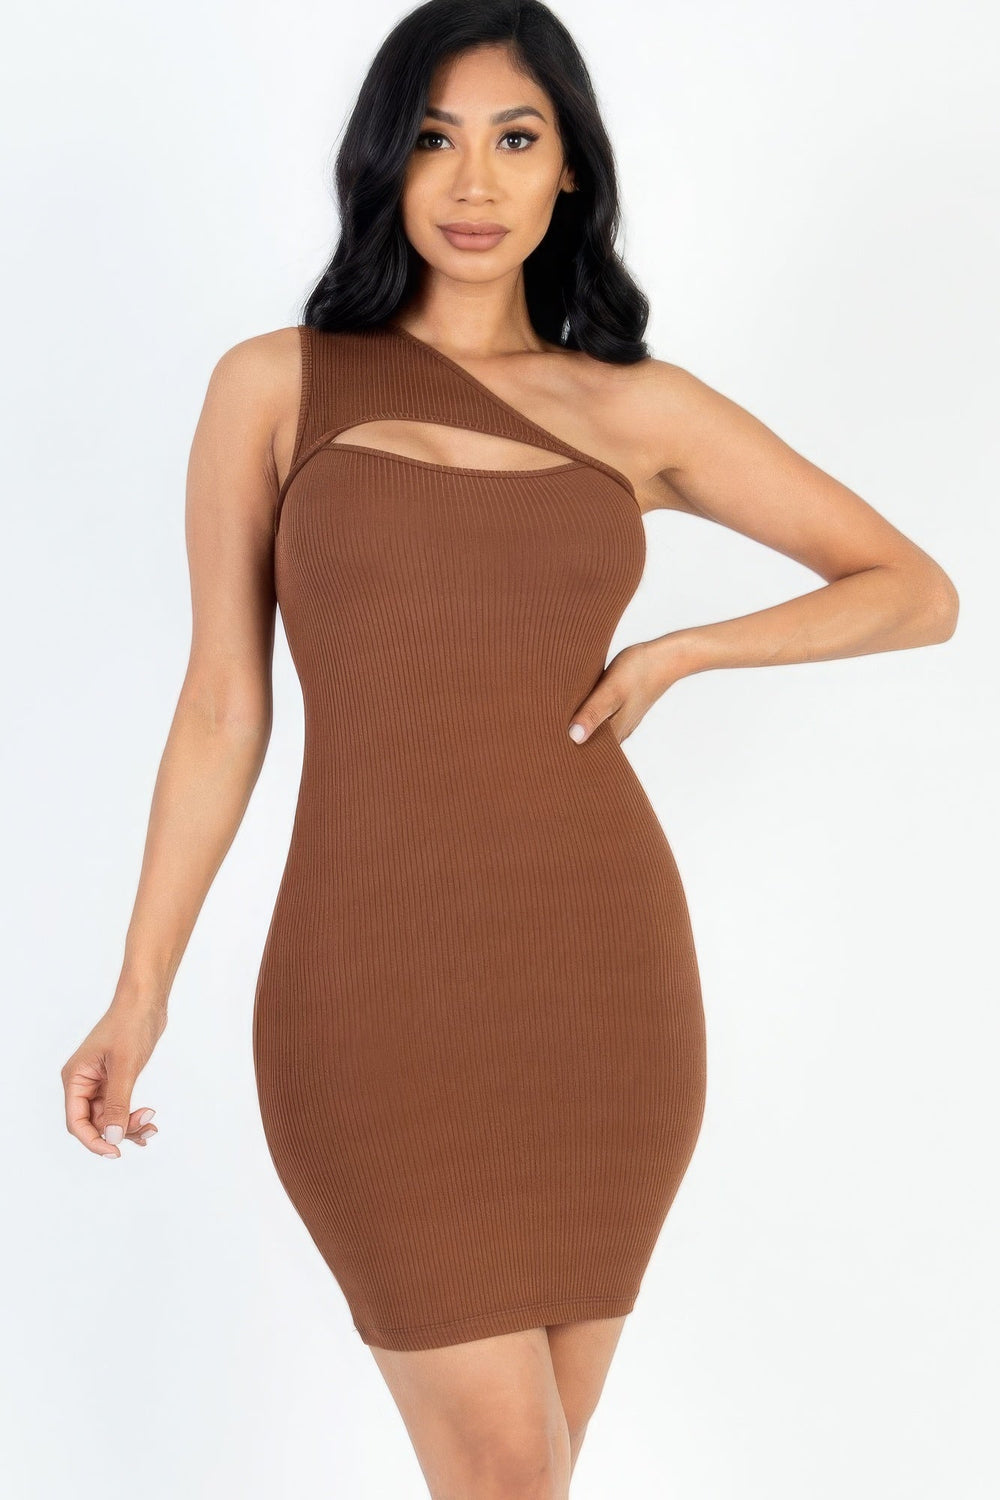 The802Gypsy  Dresses Downtown Brown / S ❤GYPSY LOVE-One Shoulder Cutout Front Mini Bodycon Dress